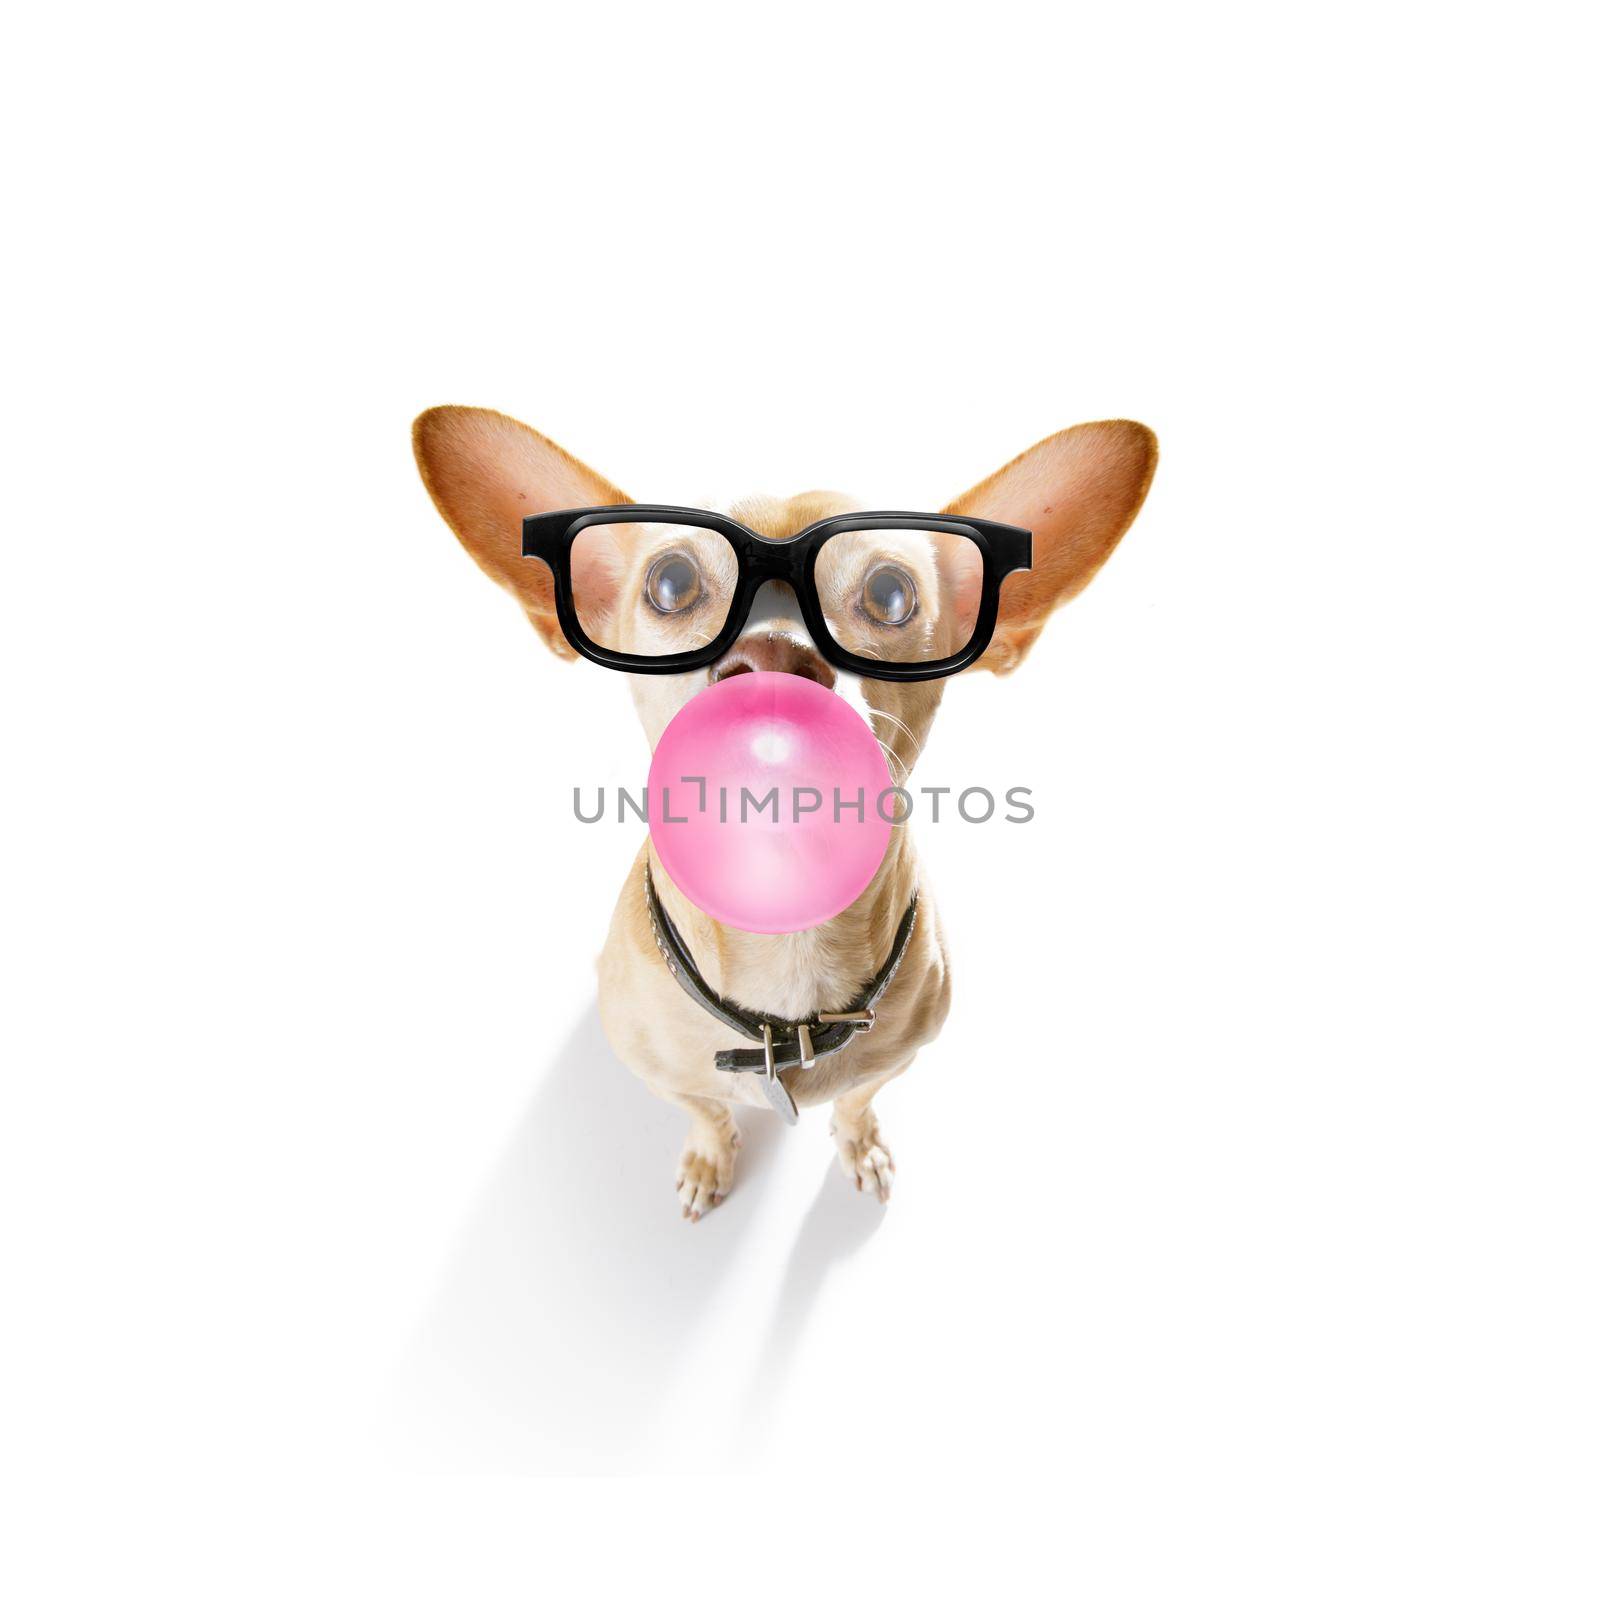 curious chihuahua dog  looking up to owner waiting or sitting patient to play or go for a walk with  chewing bubble gum with reading sunglasses or glasses,   isolated on white background